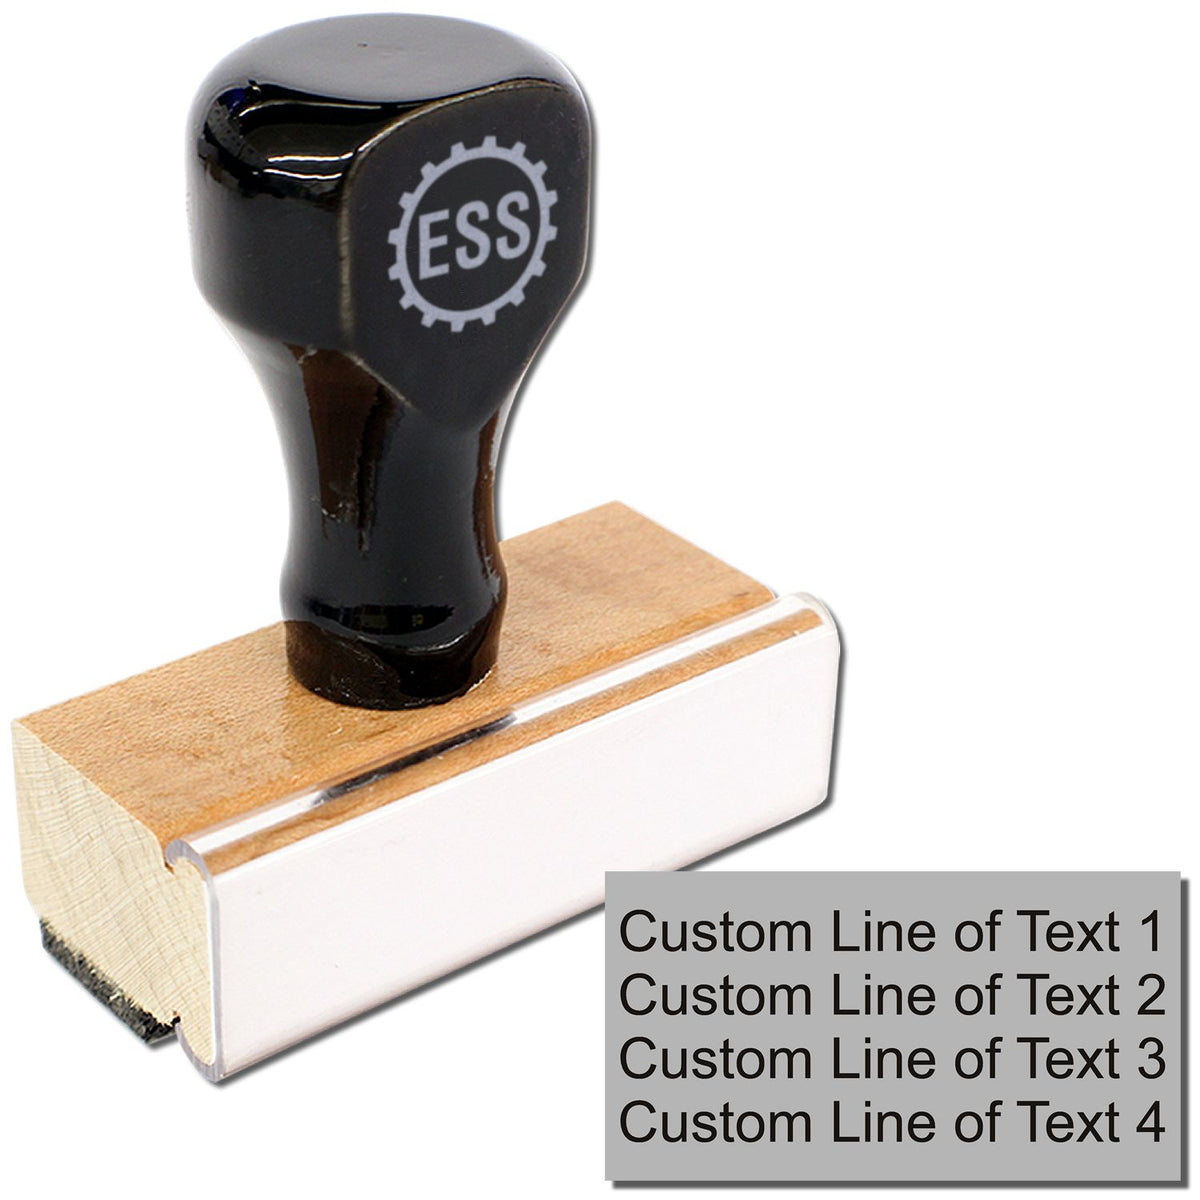 4 Line Custom Rubber Stamp with Wood Handle